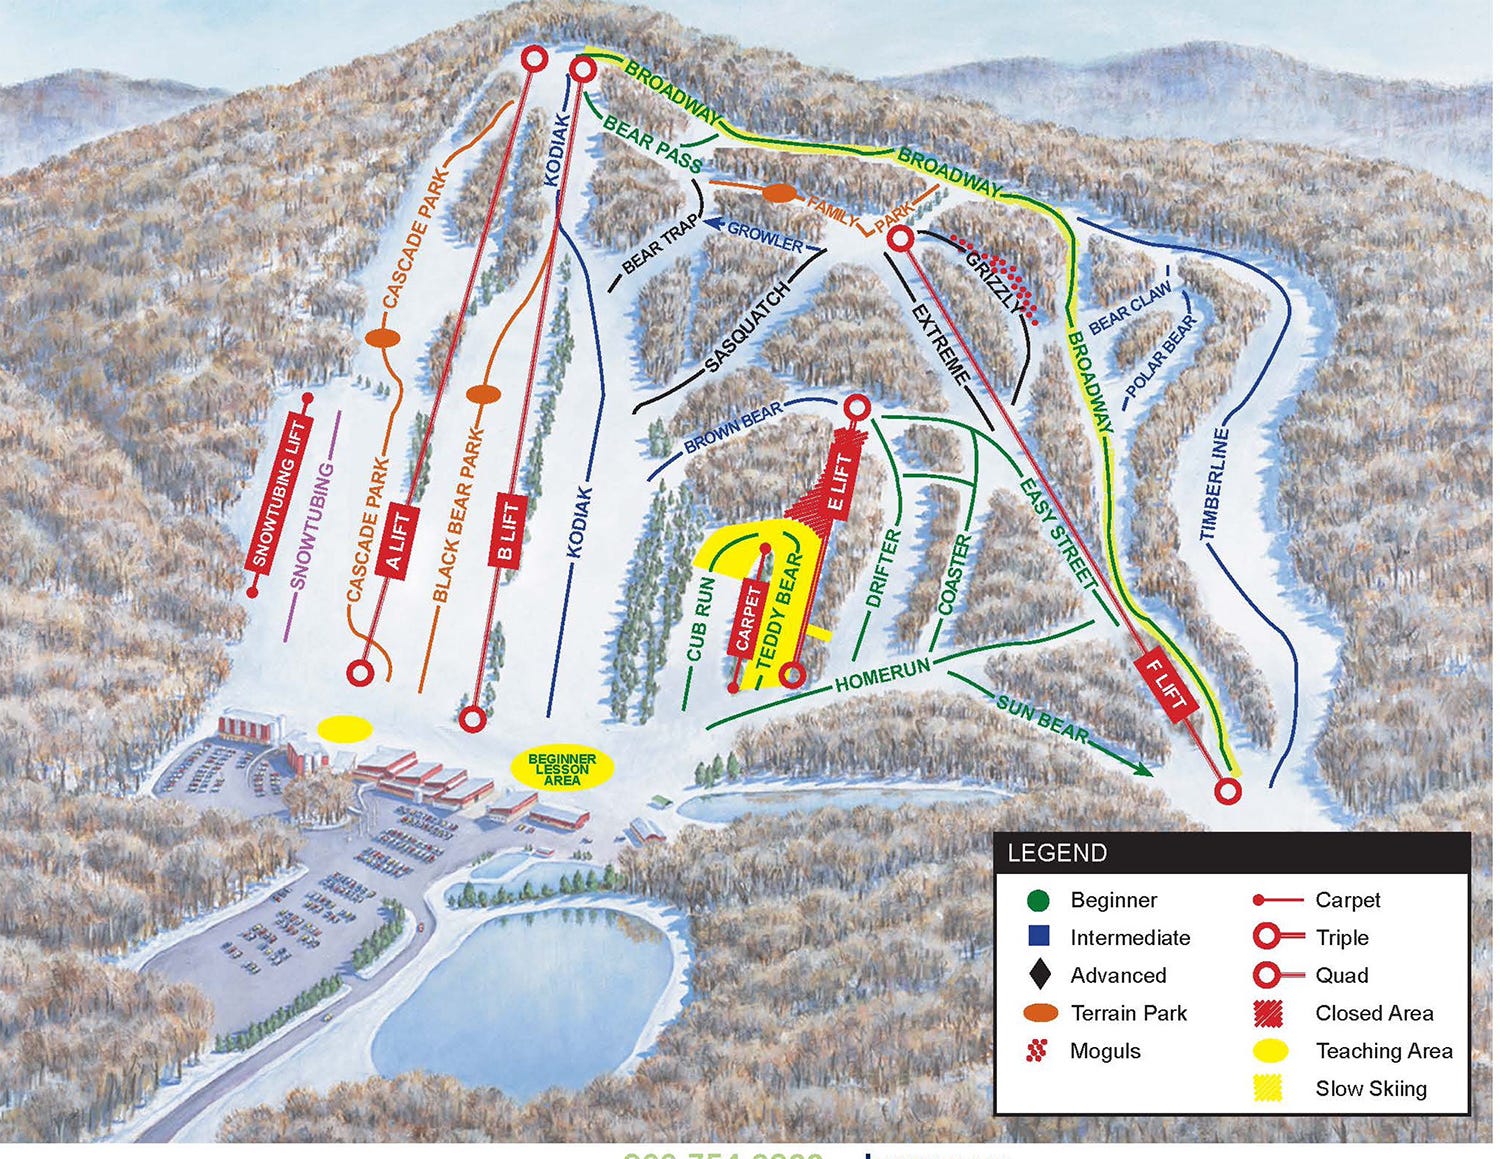 Ski Cooper Releases 202223 Partner Map 3 Days Each at 59 Ski Areas